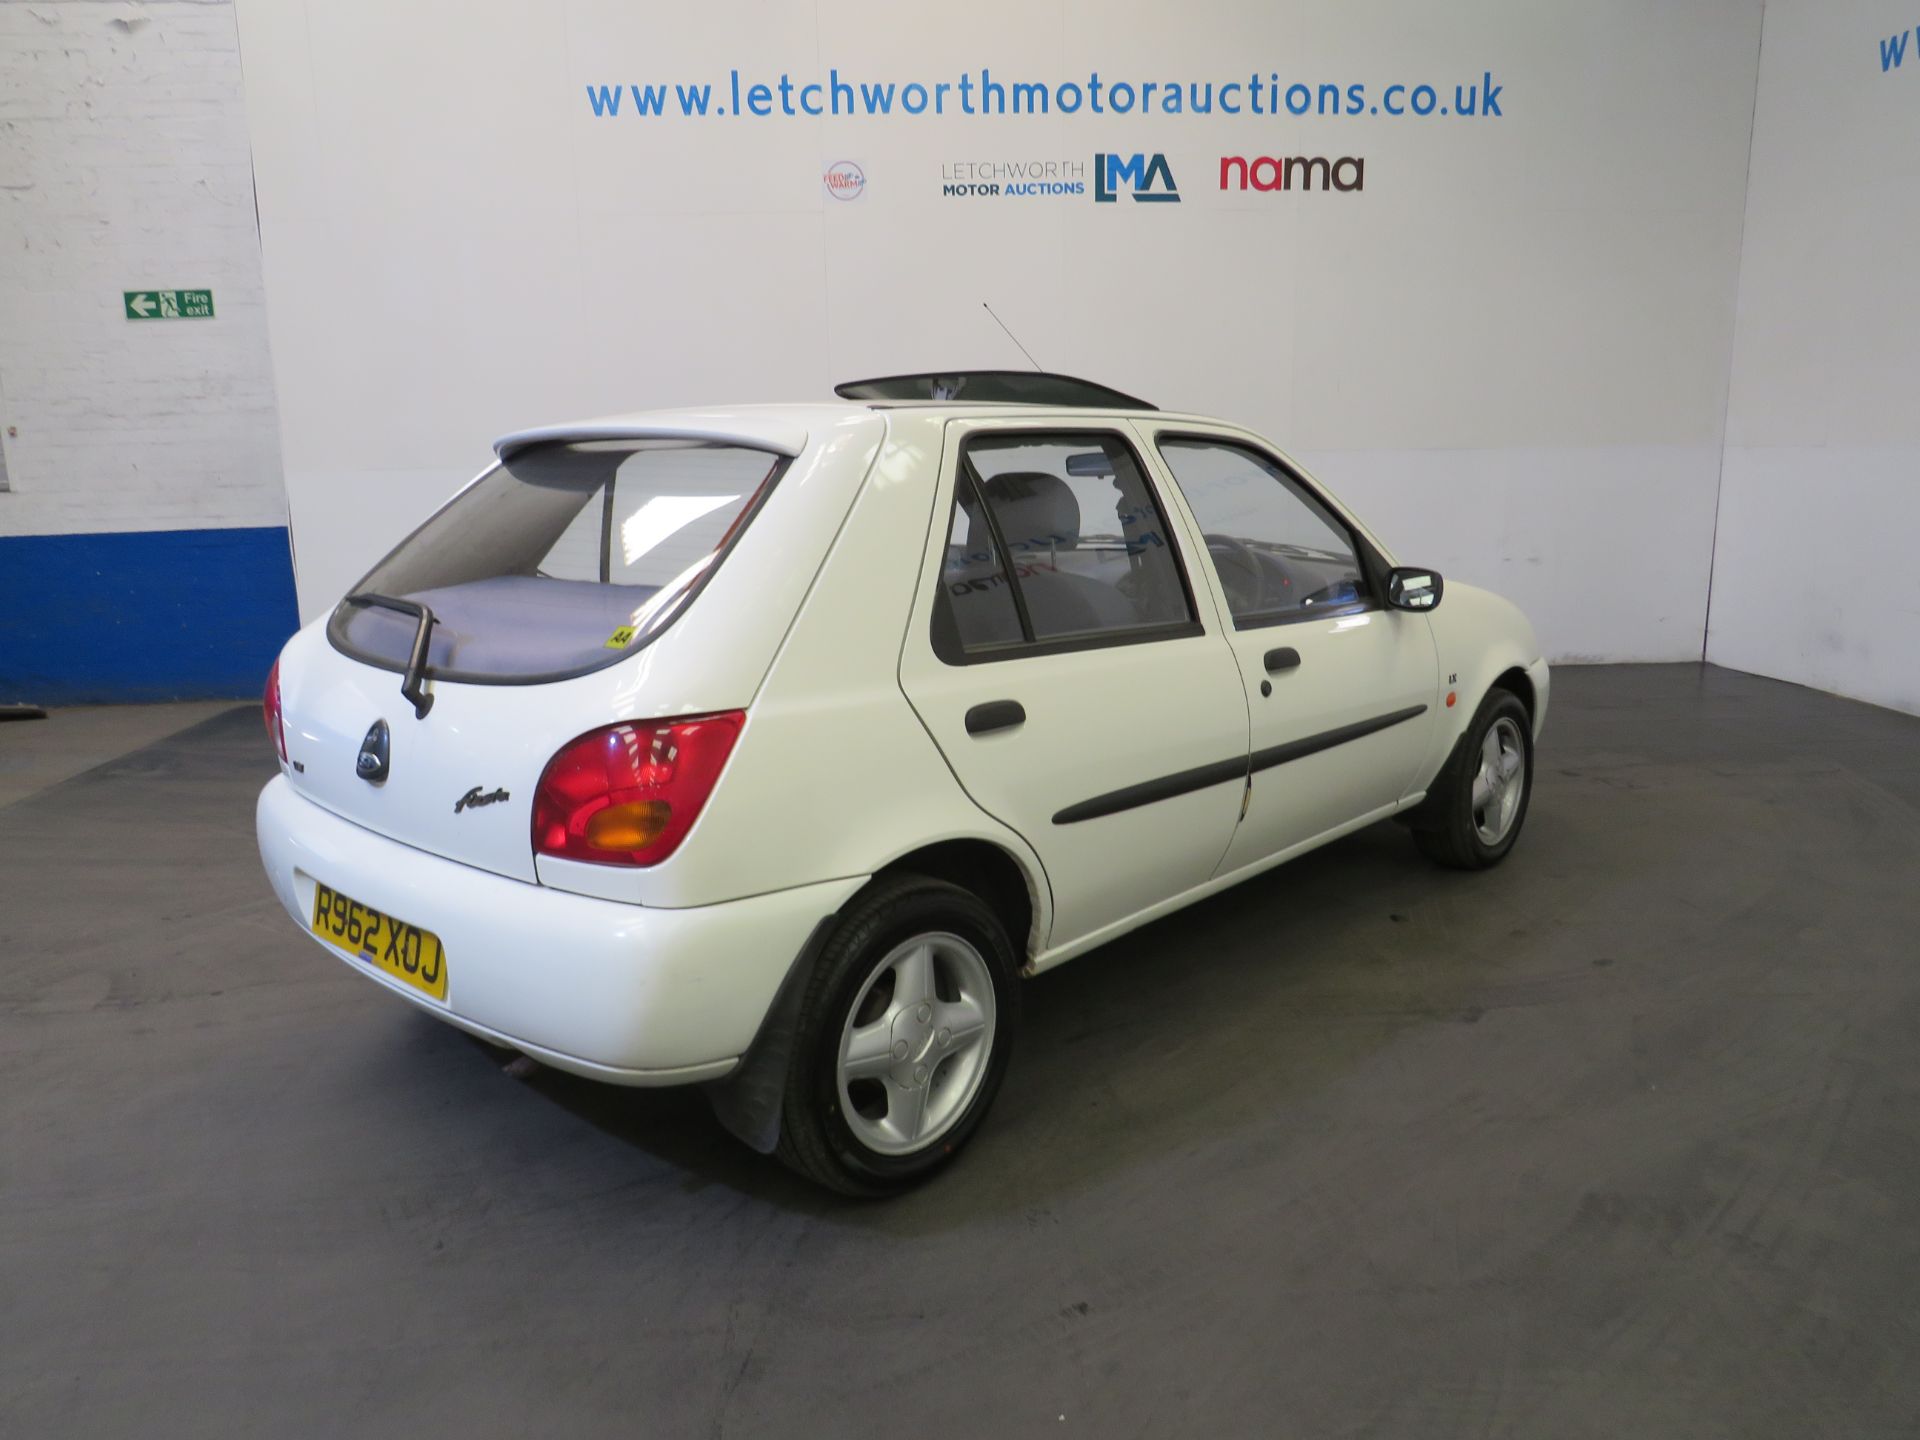 1998 Ford Fiesta LX - 1242cc - Image 6 of 15